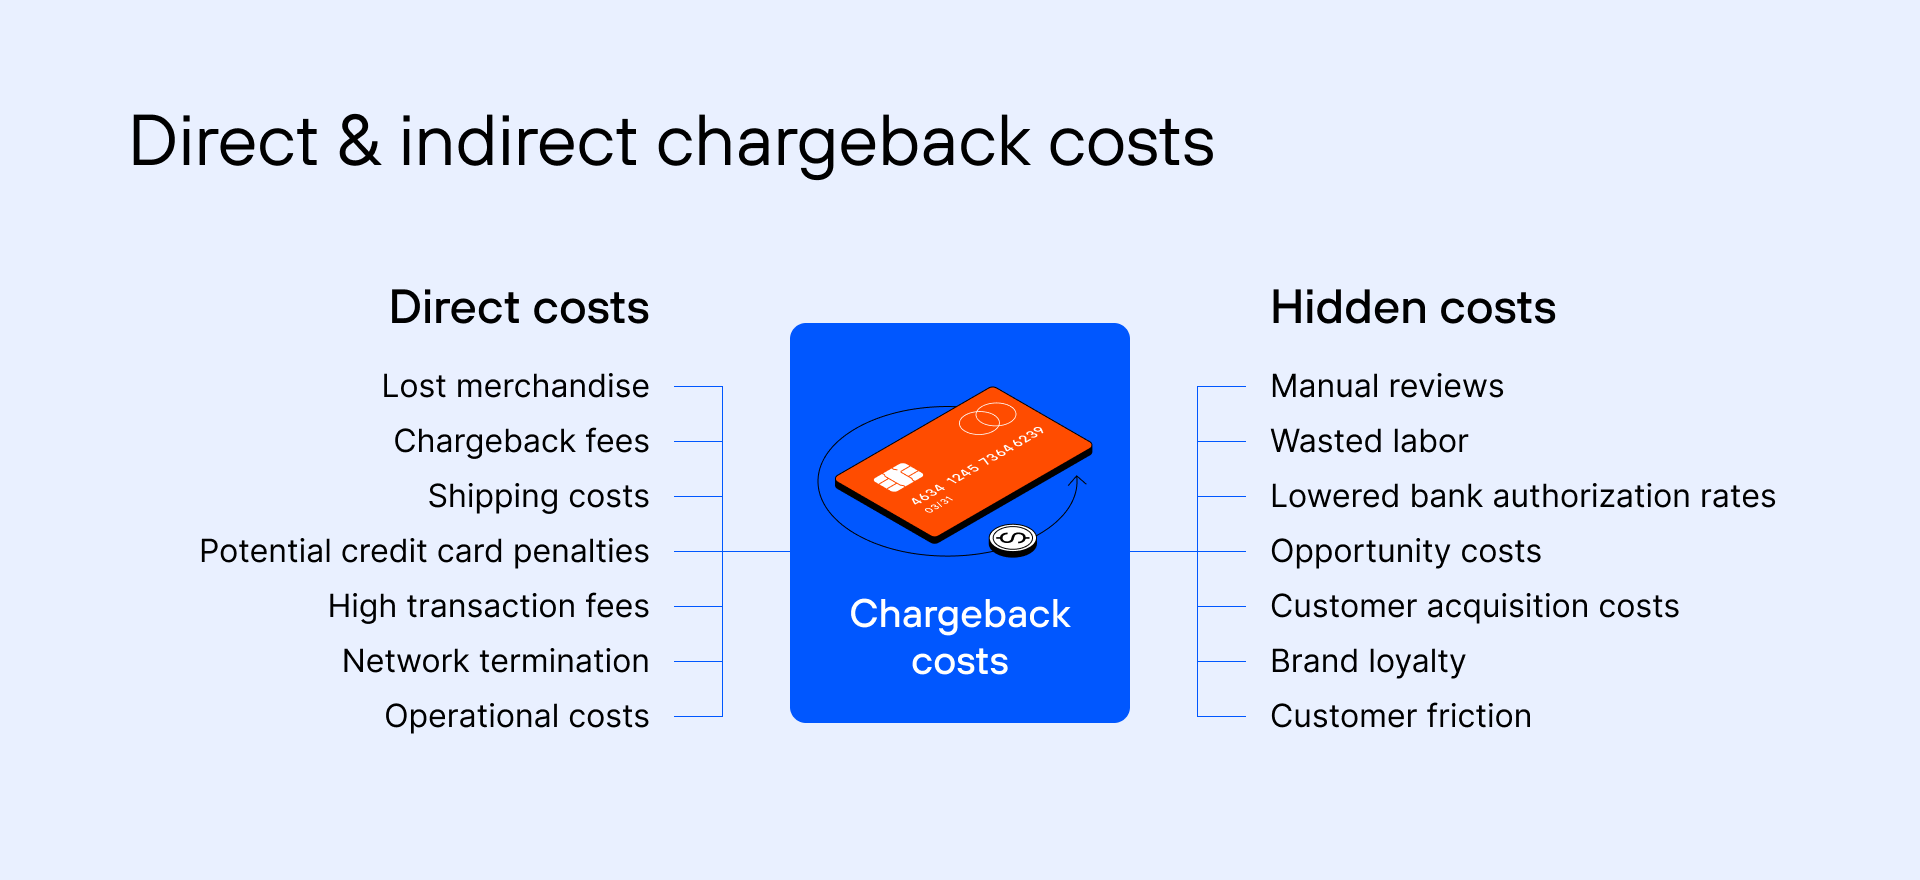 direct & indicrect chargeback costs